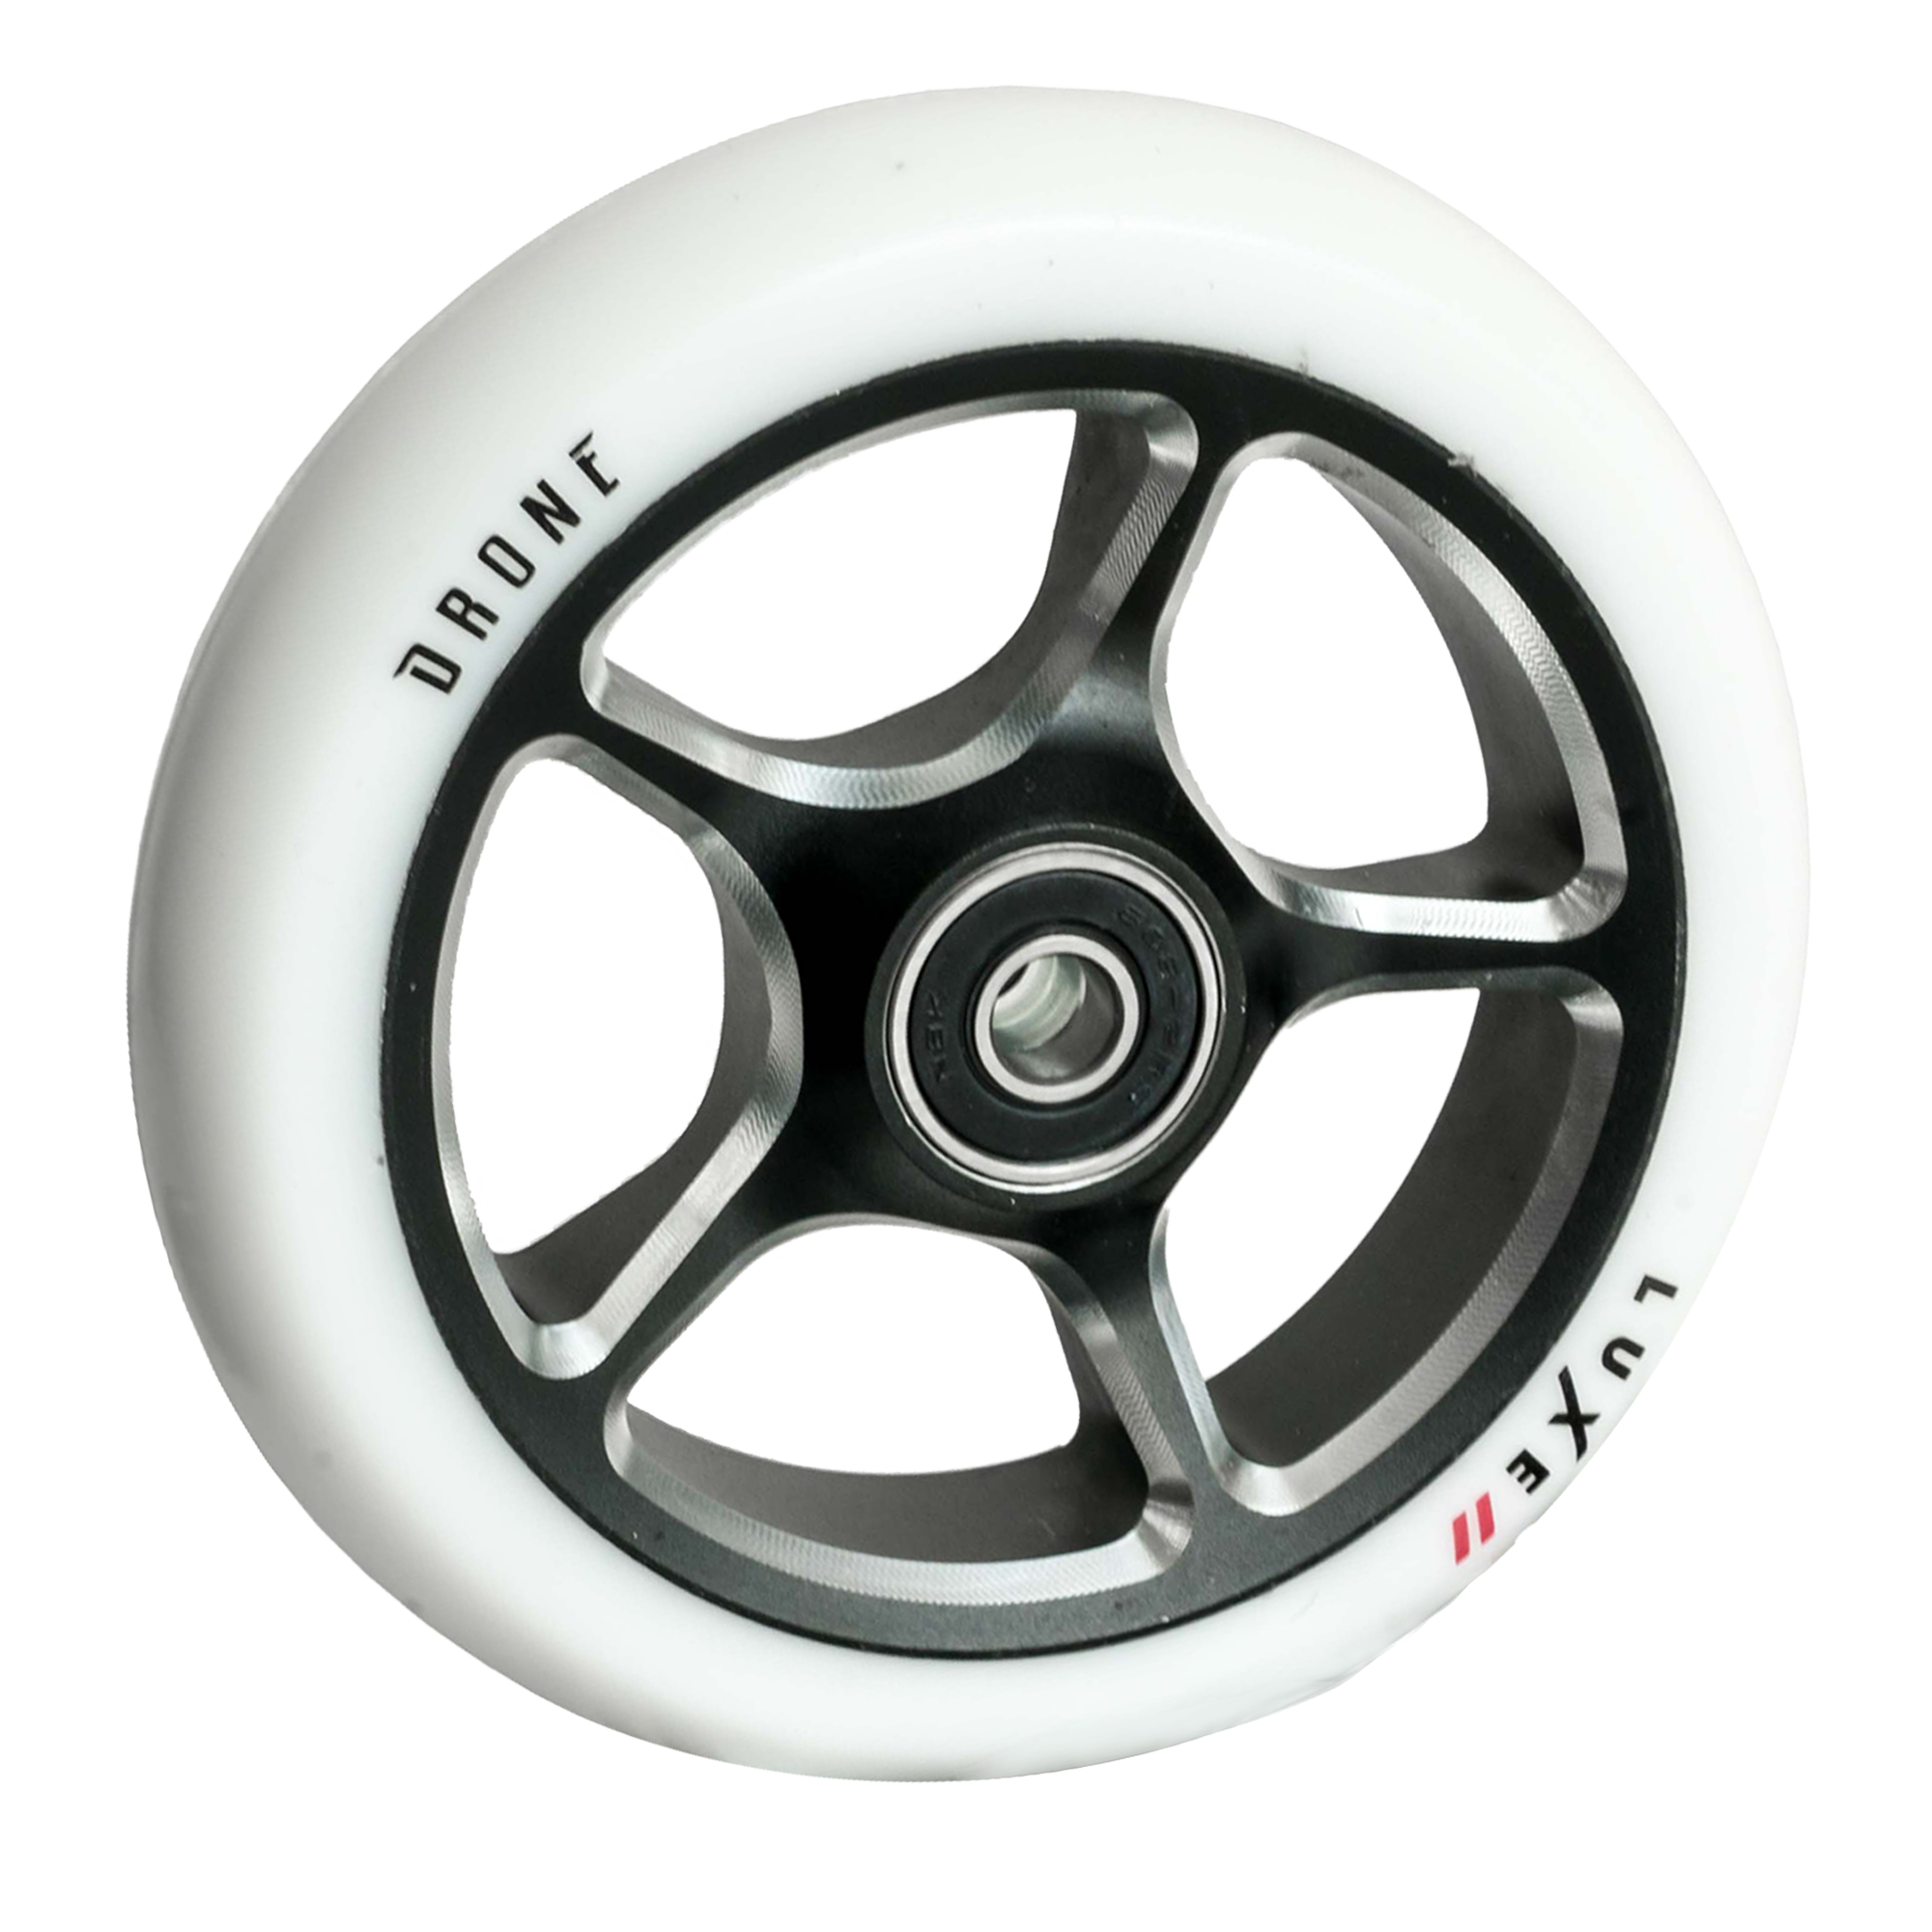 Drone 110 mm Luxe 2 Wheel White